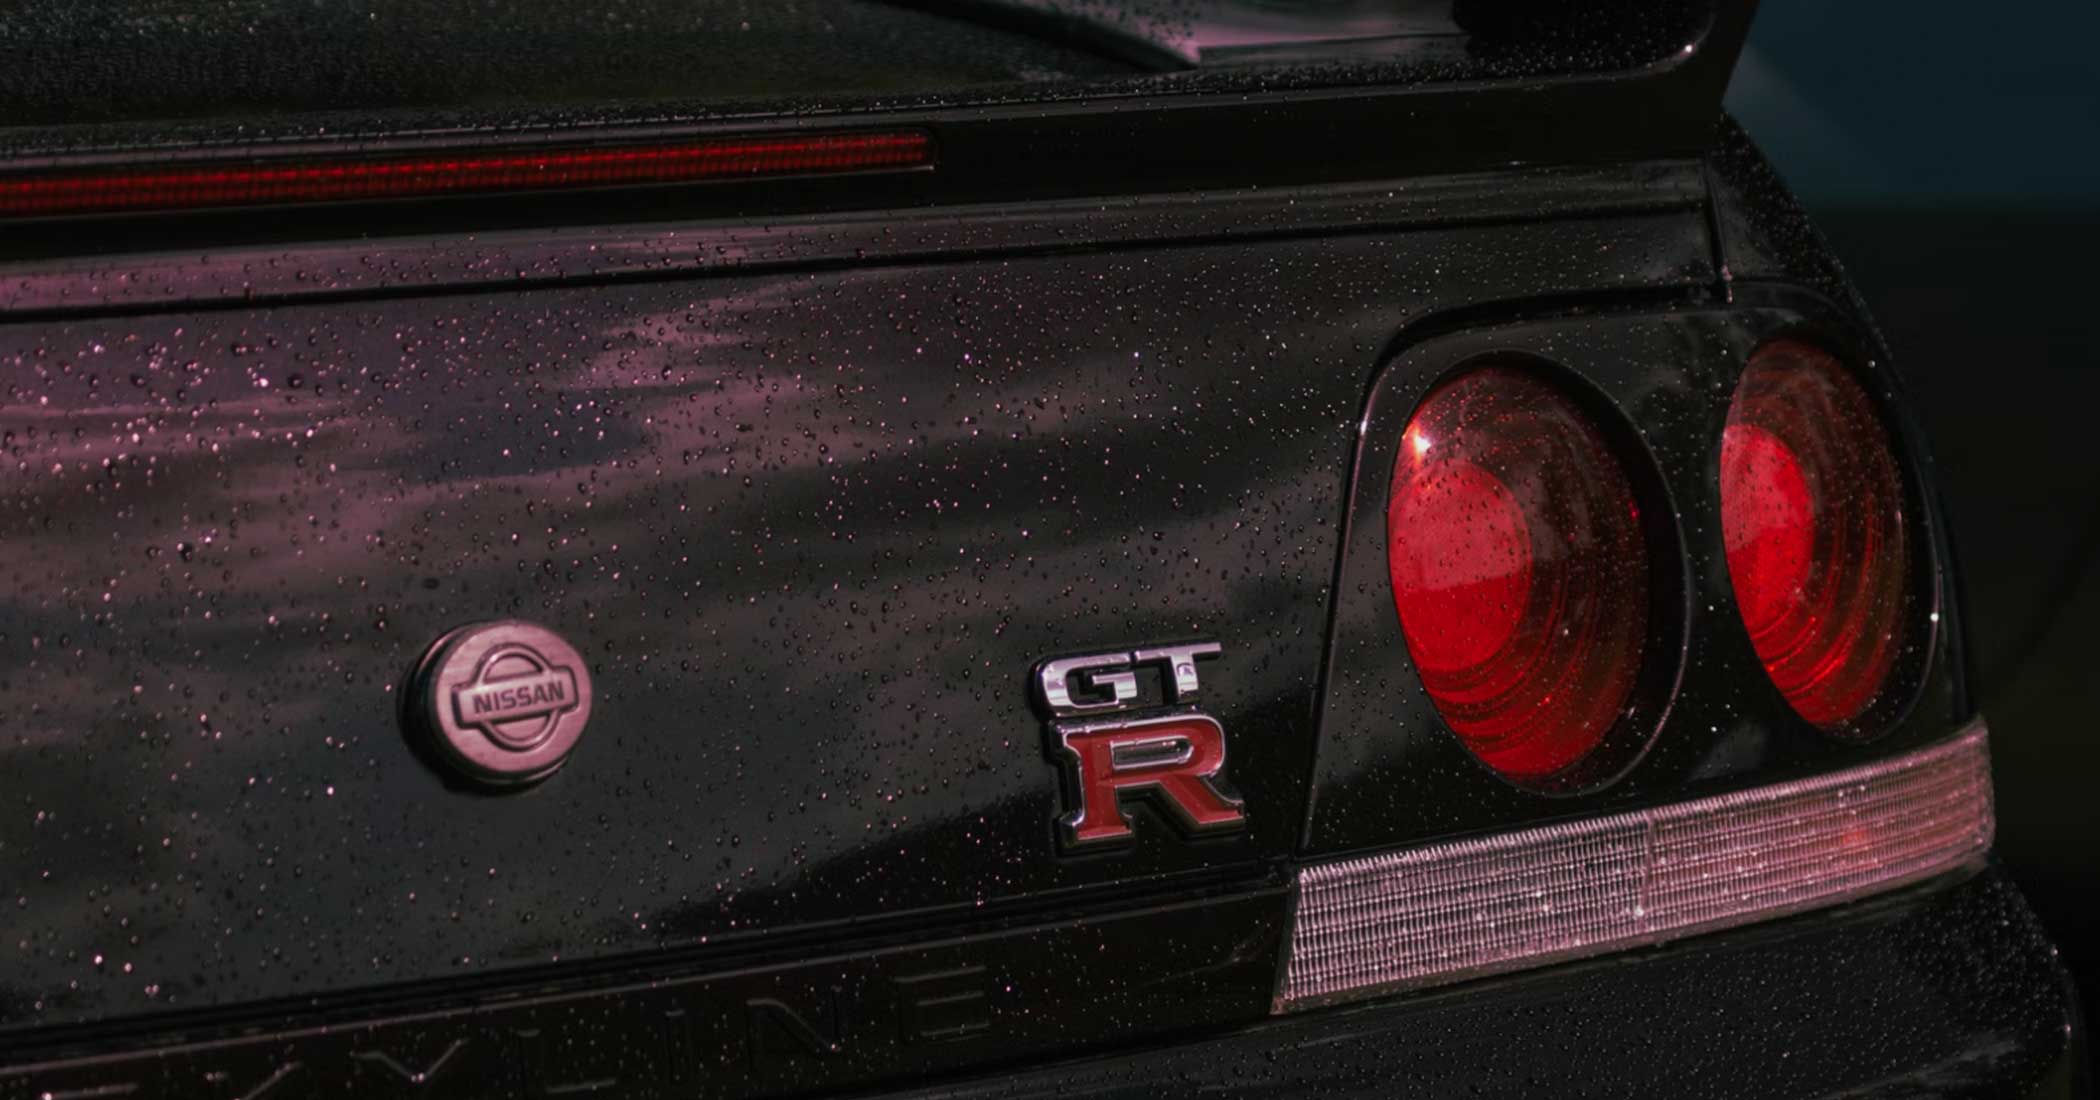 Top Facts Most People Do Not Know About The Nissan Skyline GTR R33